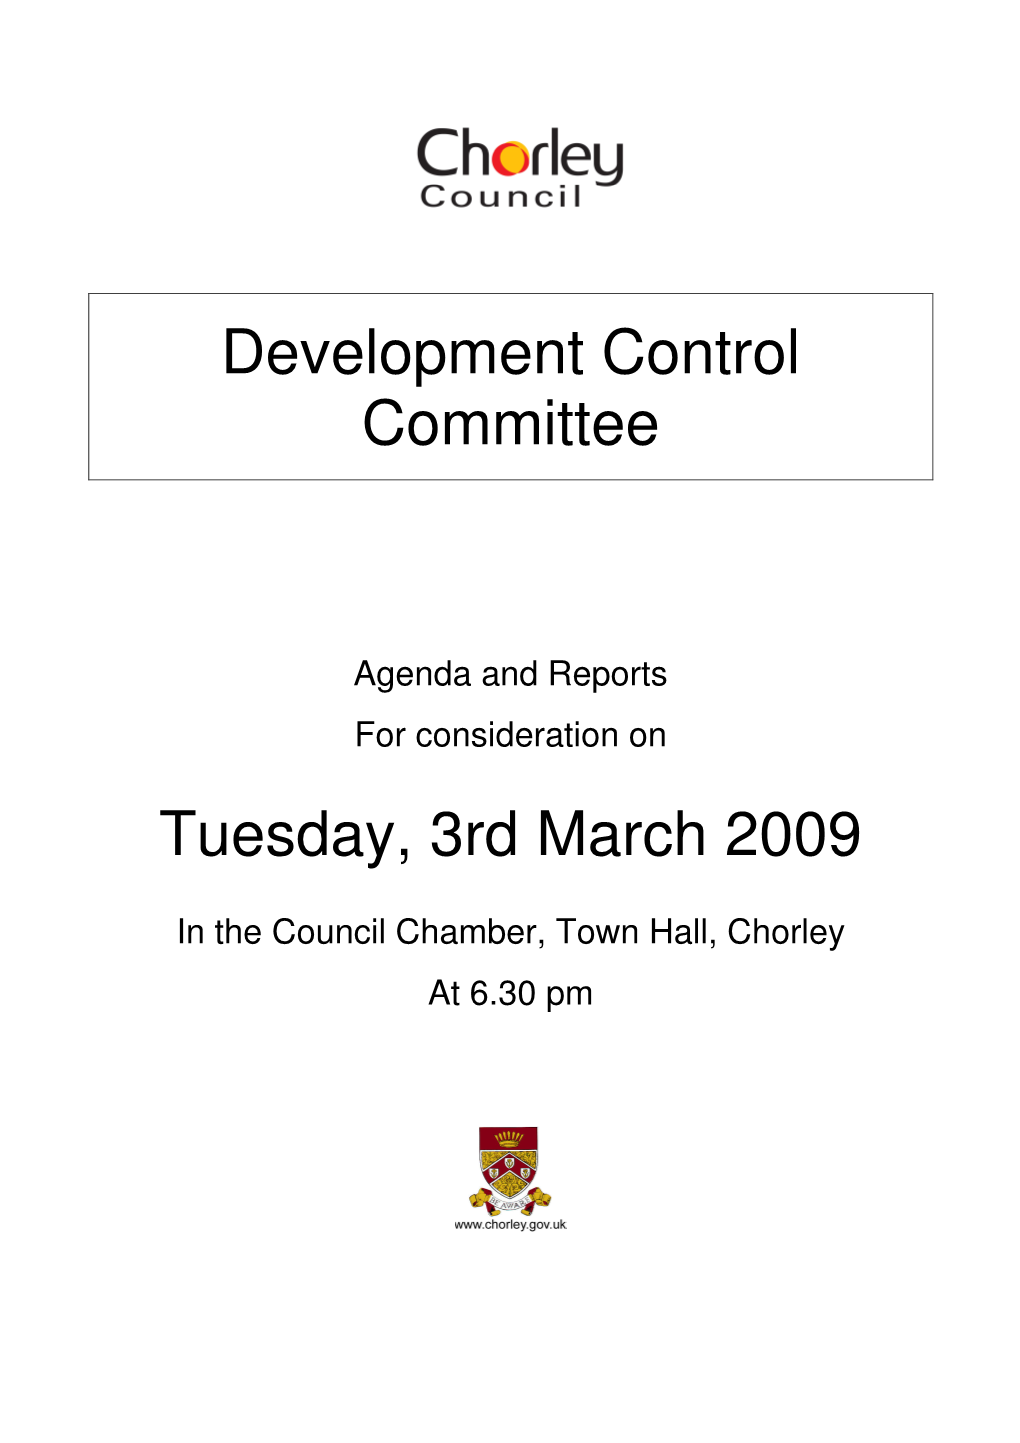 Development Control Committee Tuesday, 3Rd March 2009